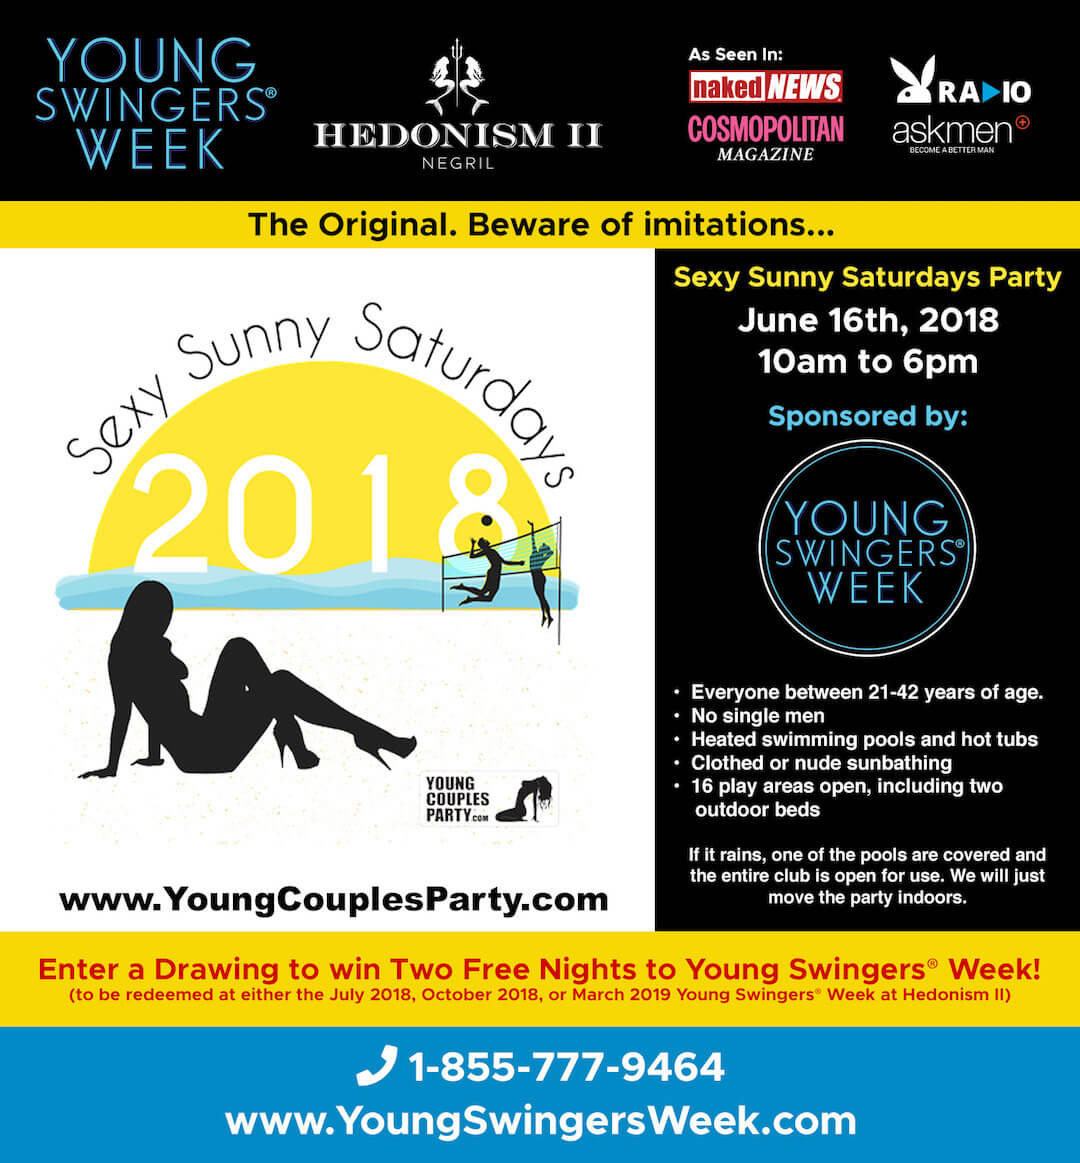 Young Swingers® Sponsored Party for YoungCouplesParty in Chicago, Illinois image